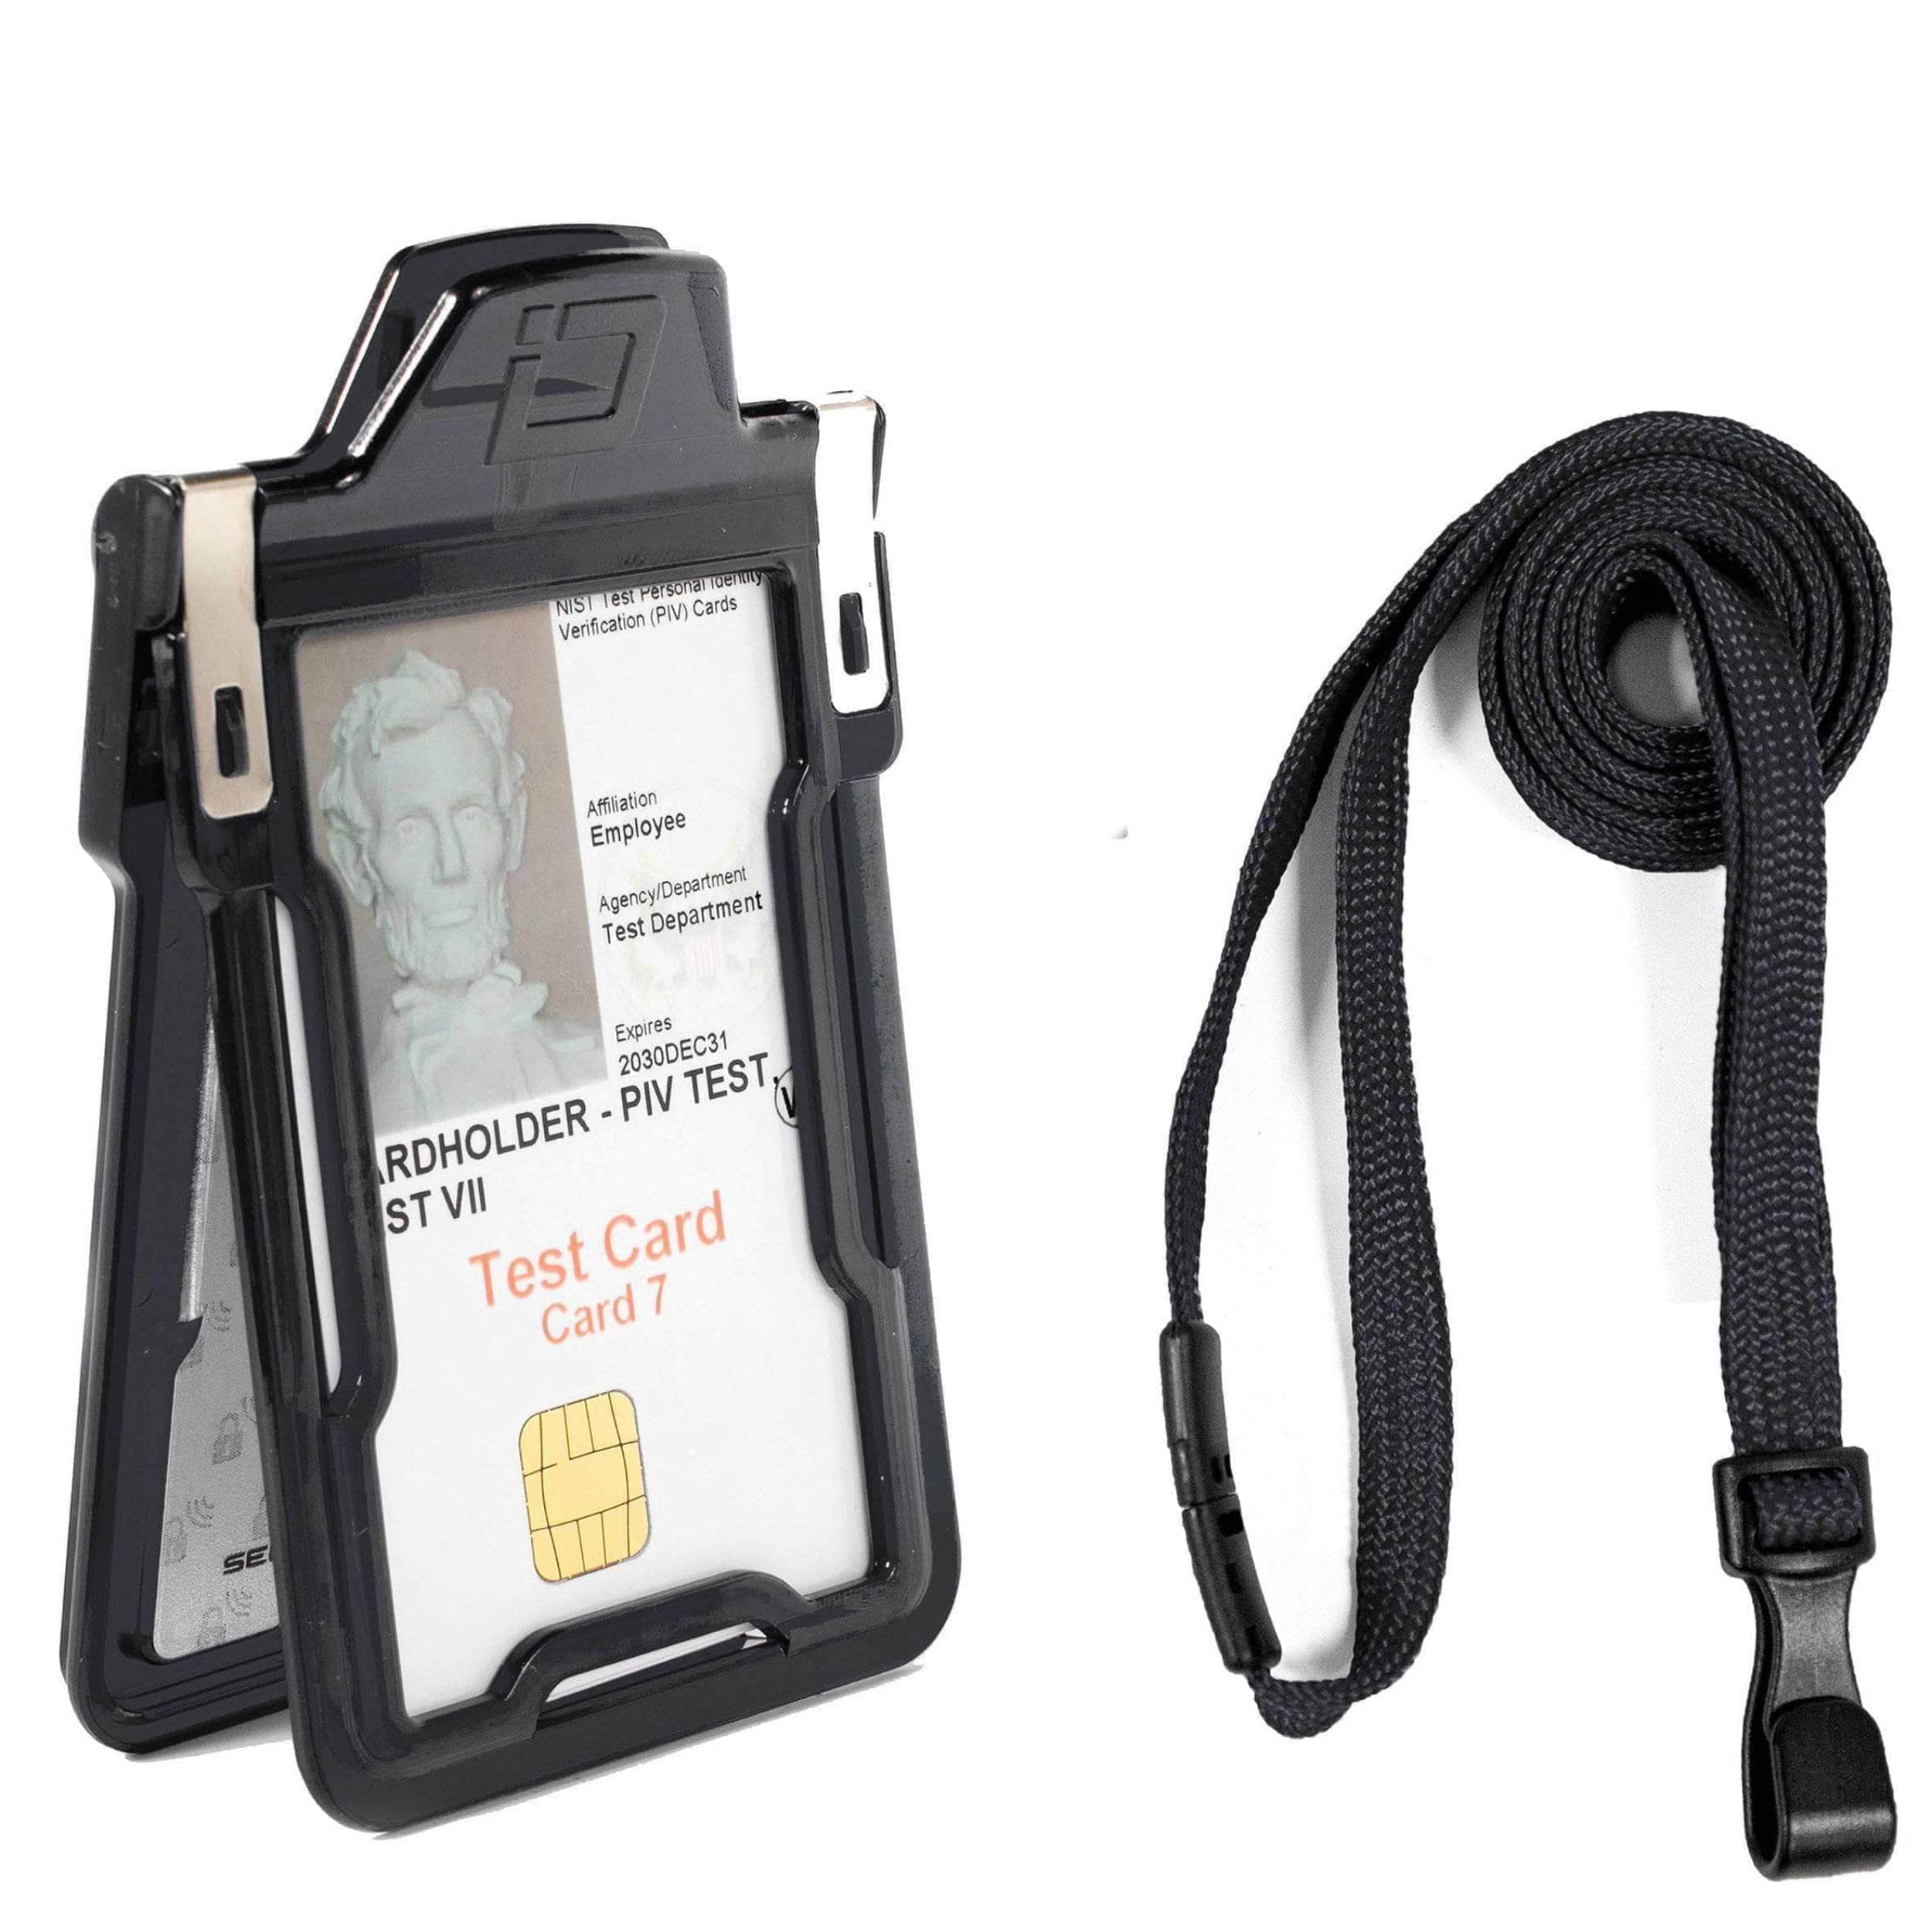 ID Stronghold Secure Badgeholder Classic 1 Card ID Badge Holder with Lanyard and Retractable Reel - RFID Blocking Badge Holder Made in The USA